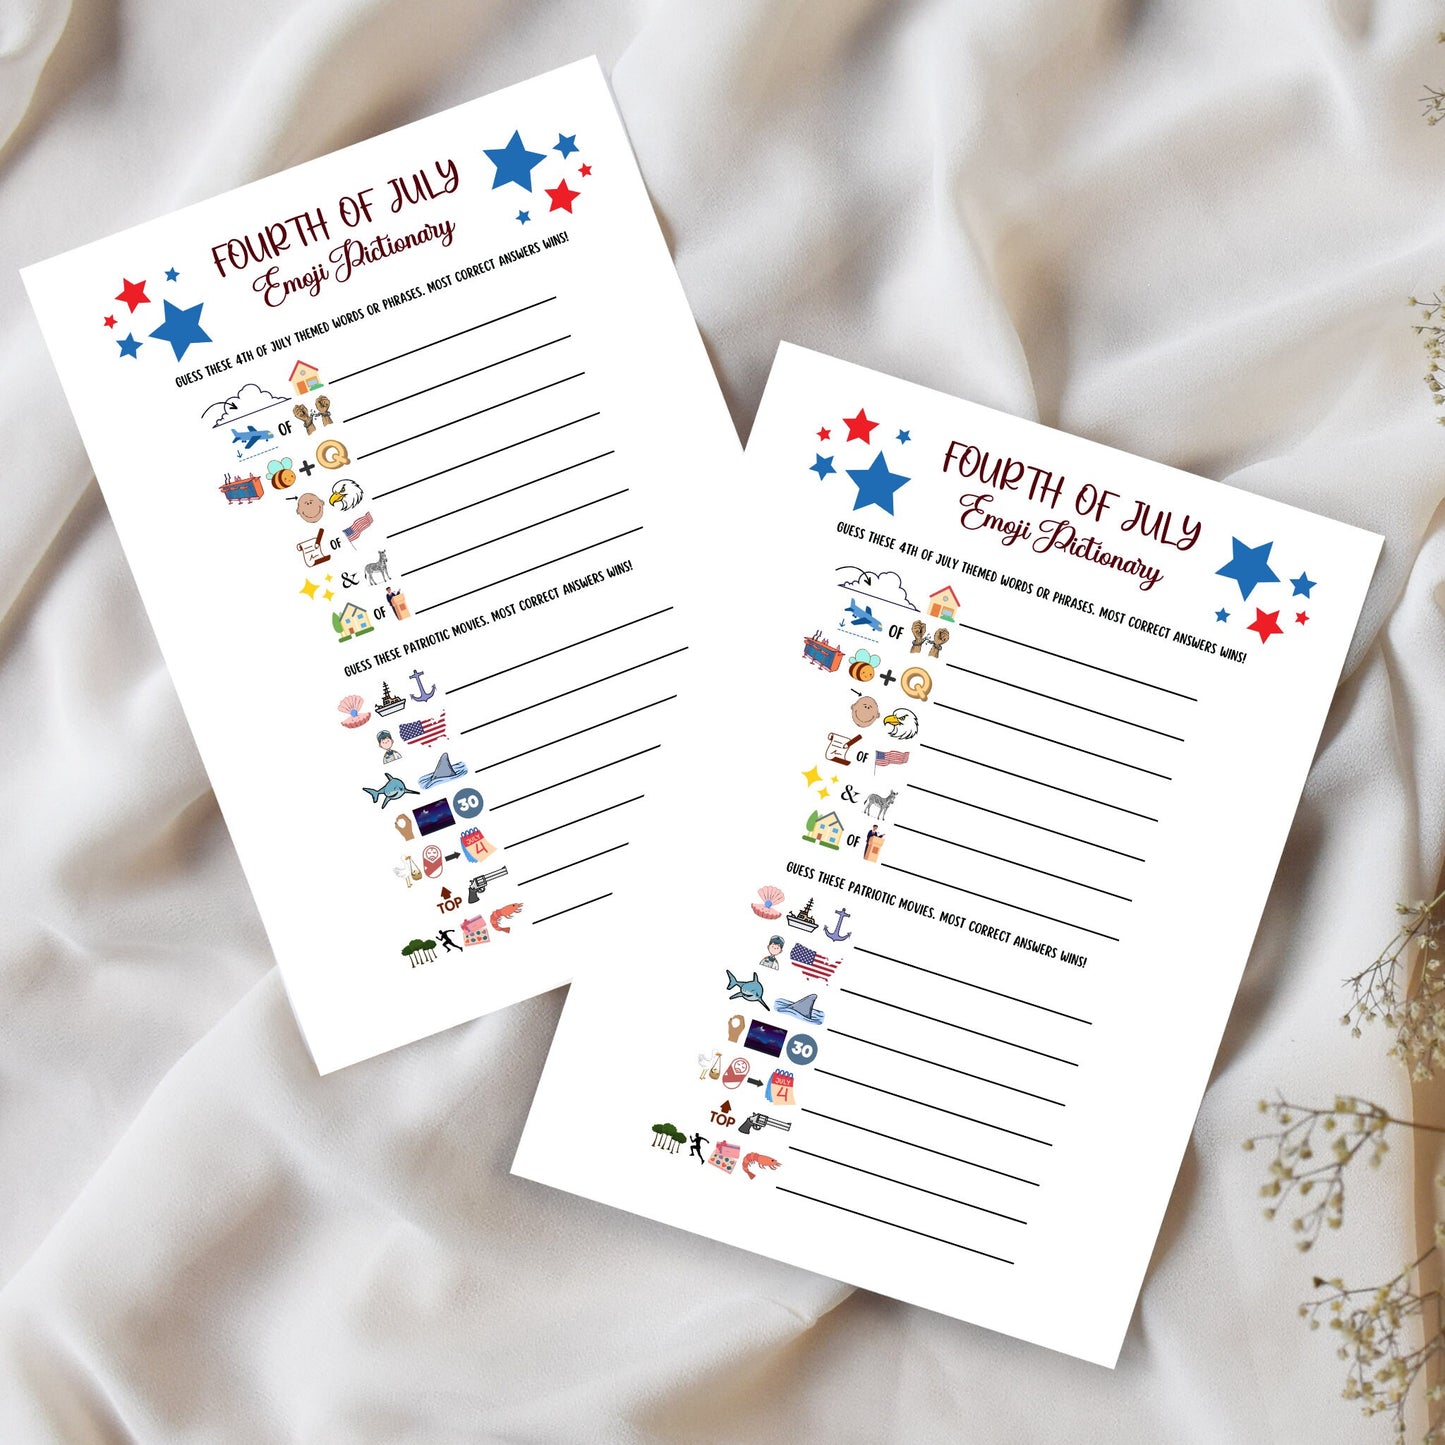 July 4th Emoji Pictionary Game Printable, Independence Day Party, Family Activity Adults & Kids, Fourth of July Patriotic Movie Trivia Quiz